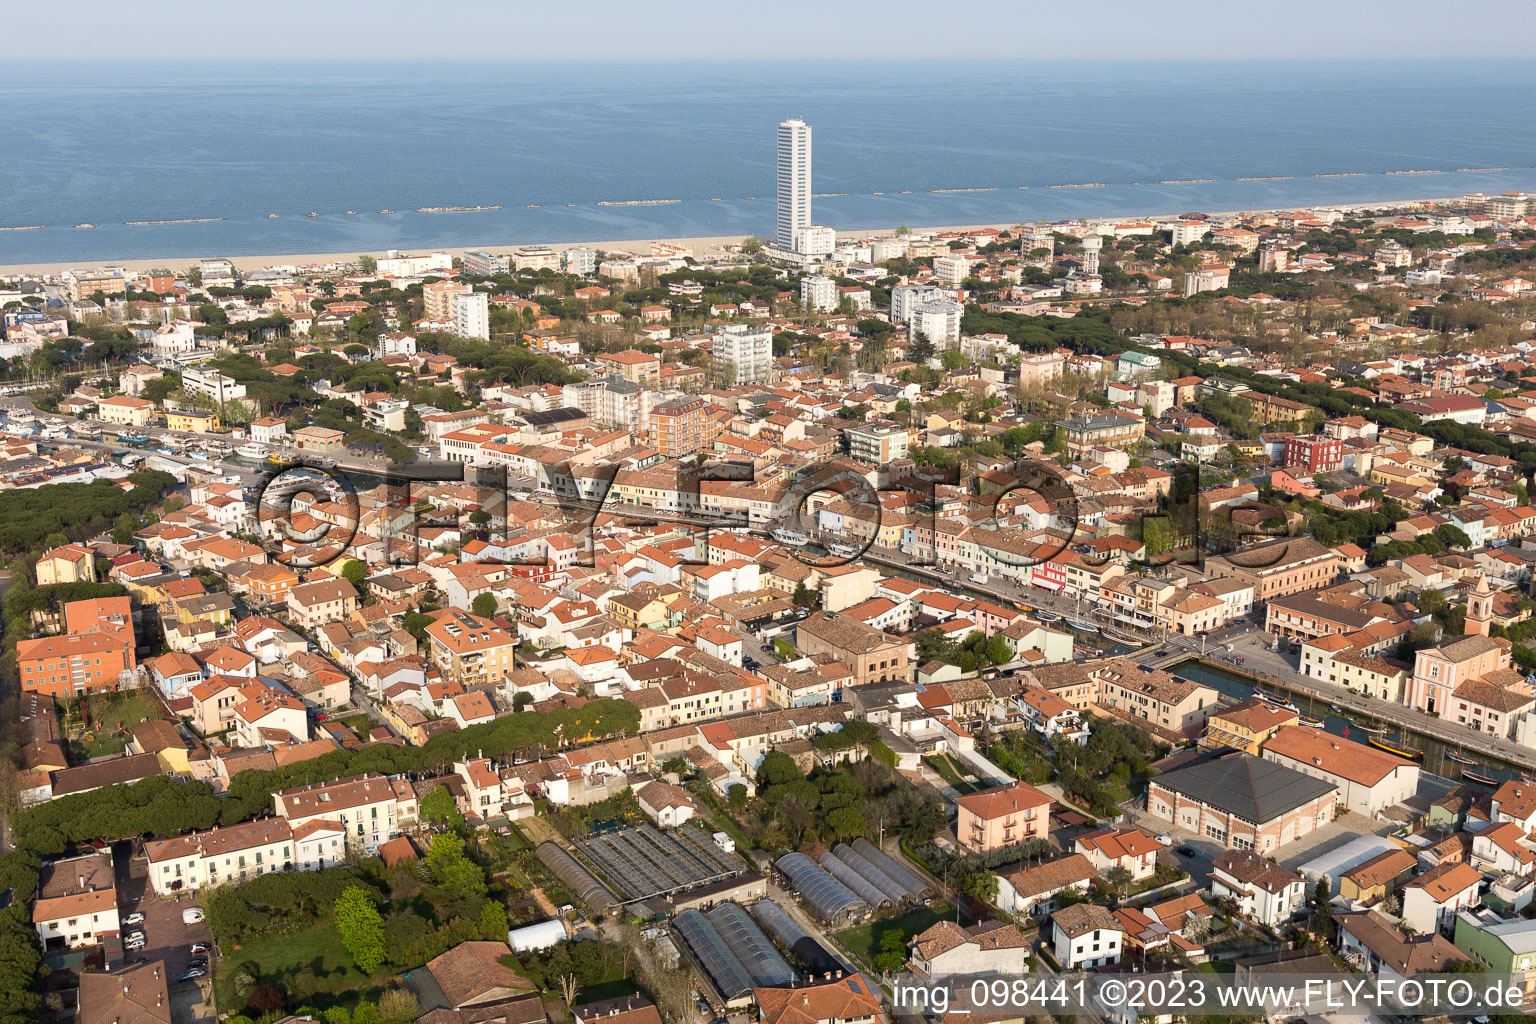 Cesenatico in the state Emilia Romagna, Italy from the drone perspective